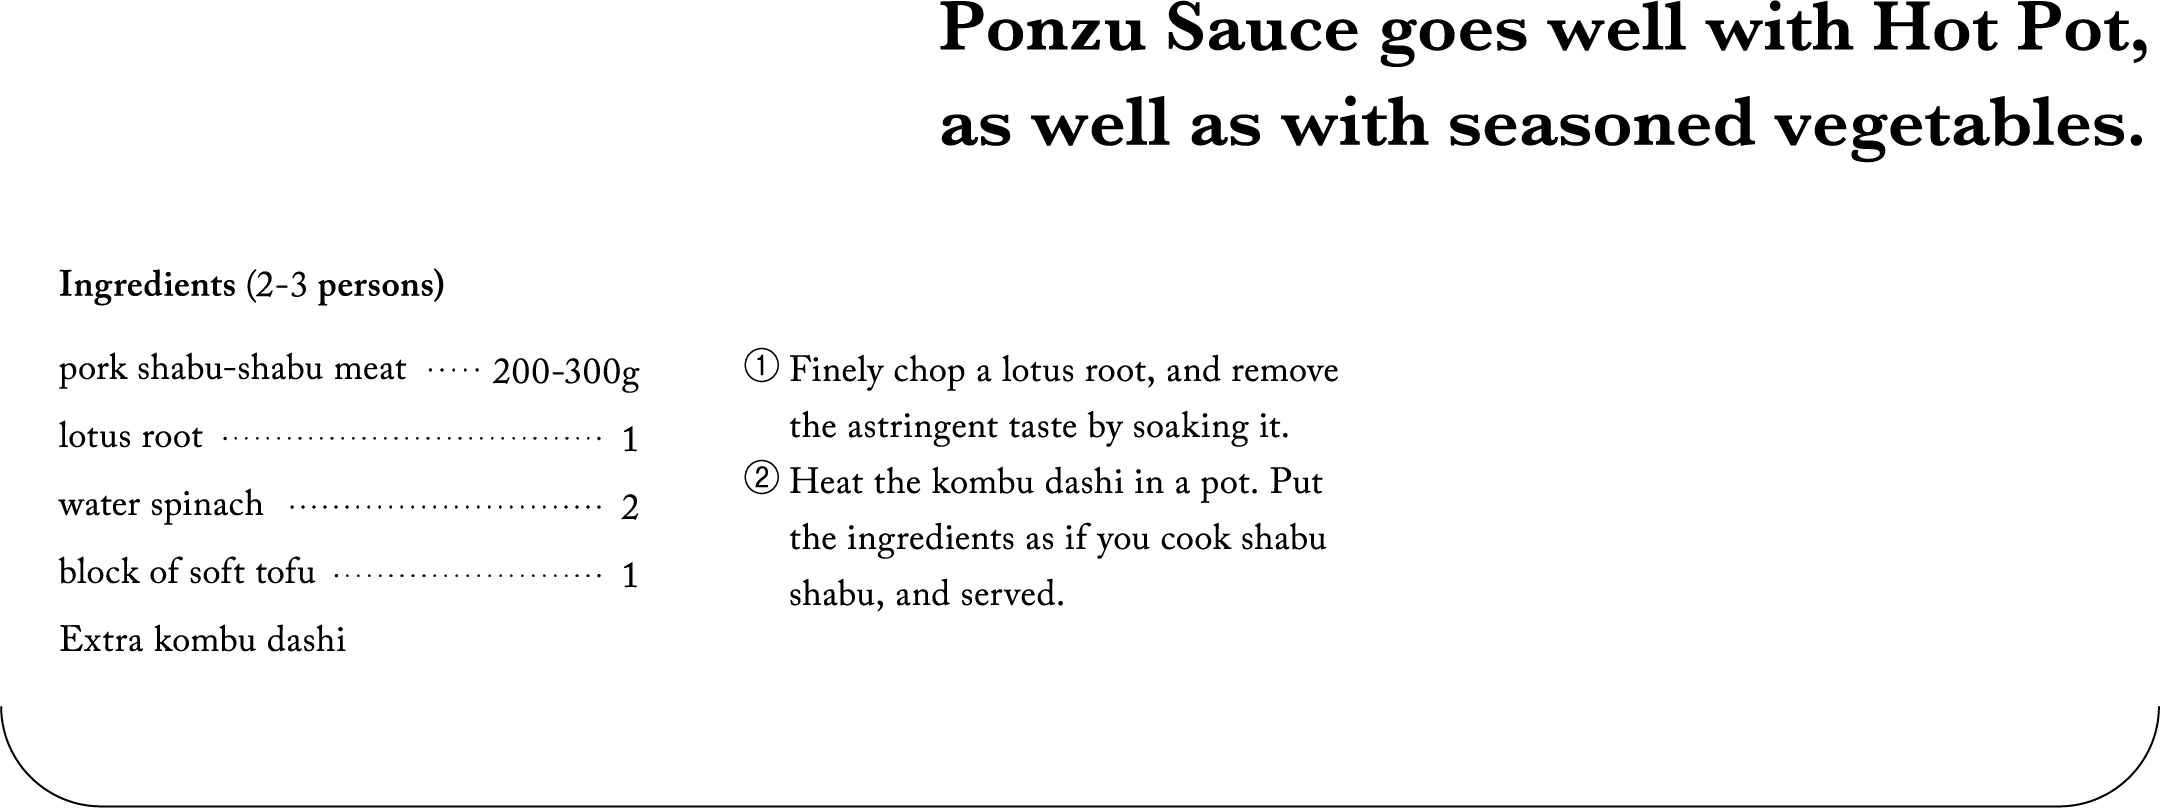 Ponzu Sauce goes well with Hot Pot, as well as with seasoned vegetables.